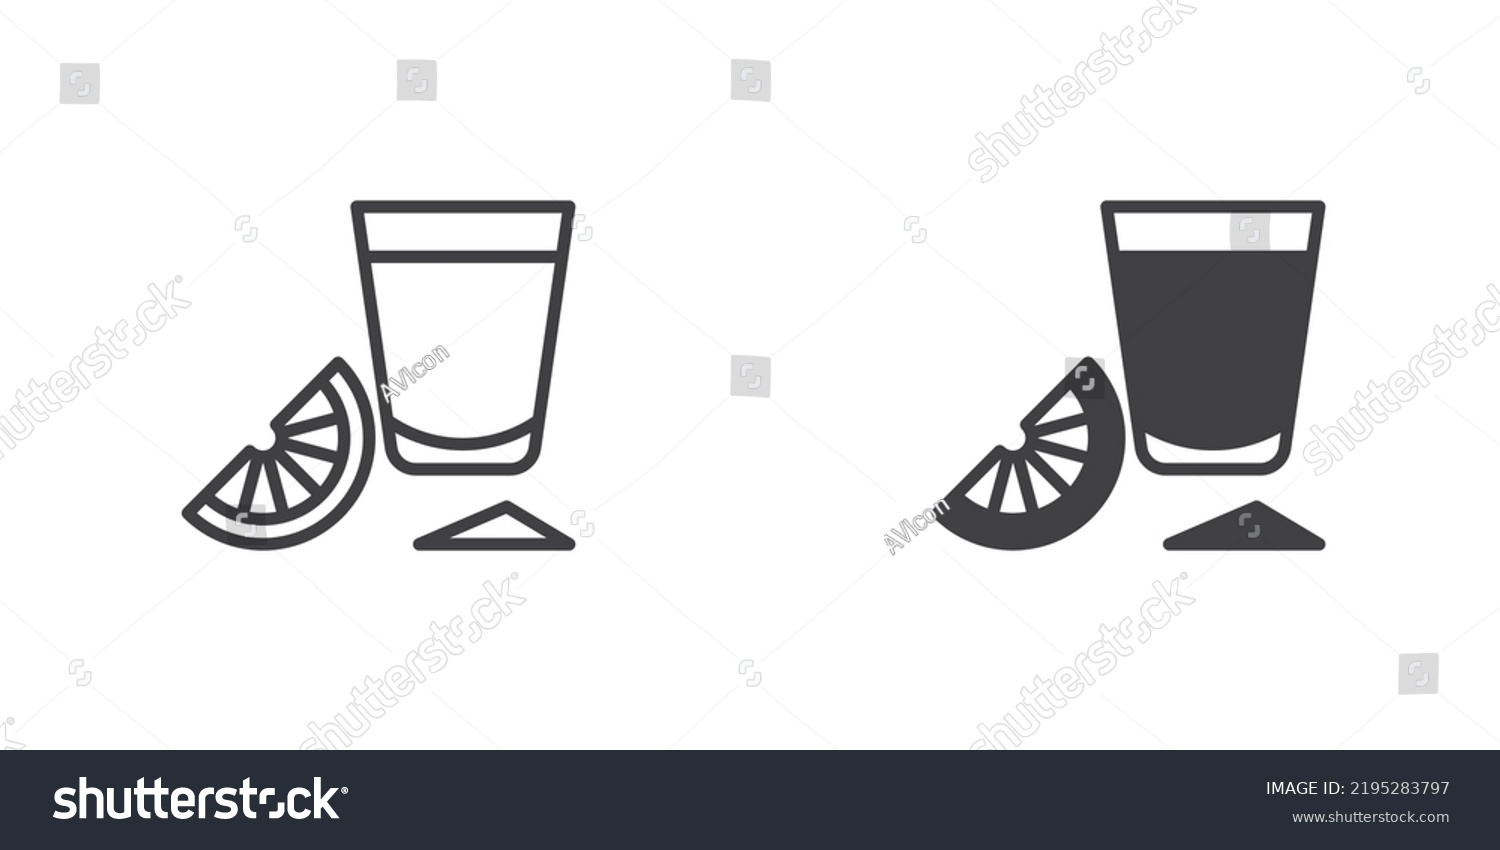 Tequila shot icon images stock photos d objects vectors